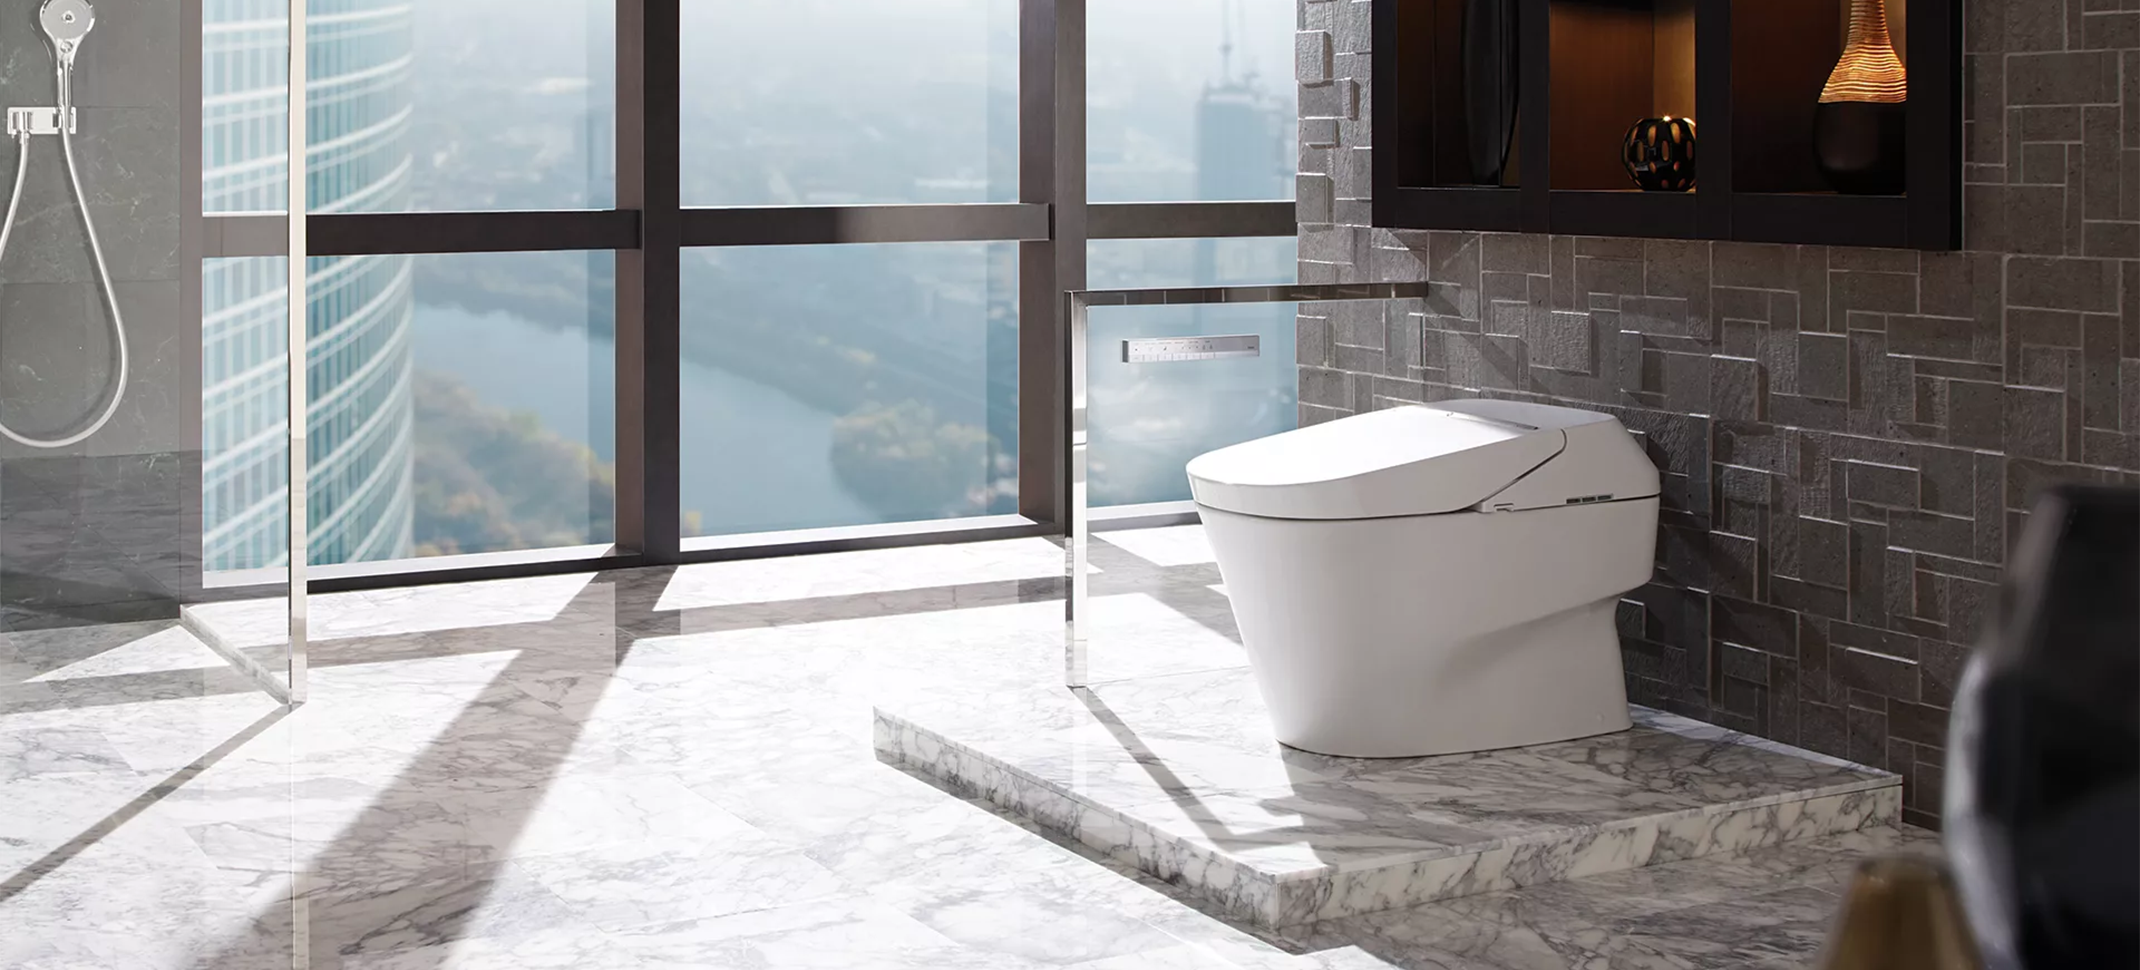 Toto Washlet G450 1.0 Or 0.8 GPF Smart Toilet With Integrated Bidet Seat And Cefiontect, Cotton White - MS922CUMFG#01